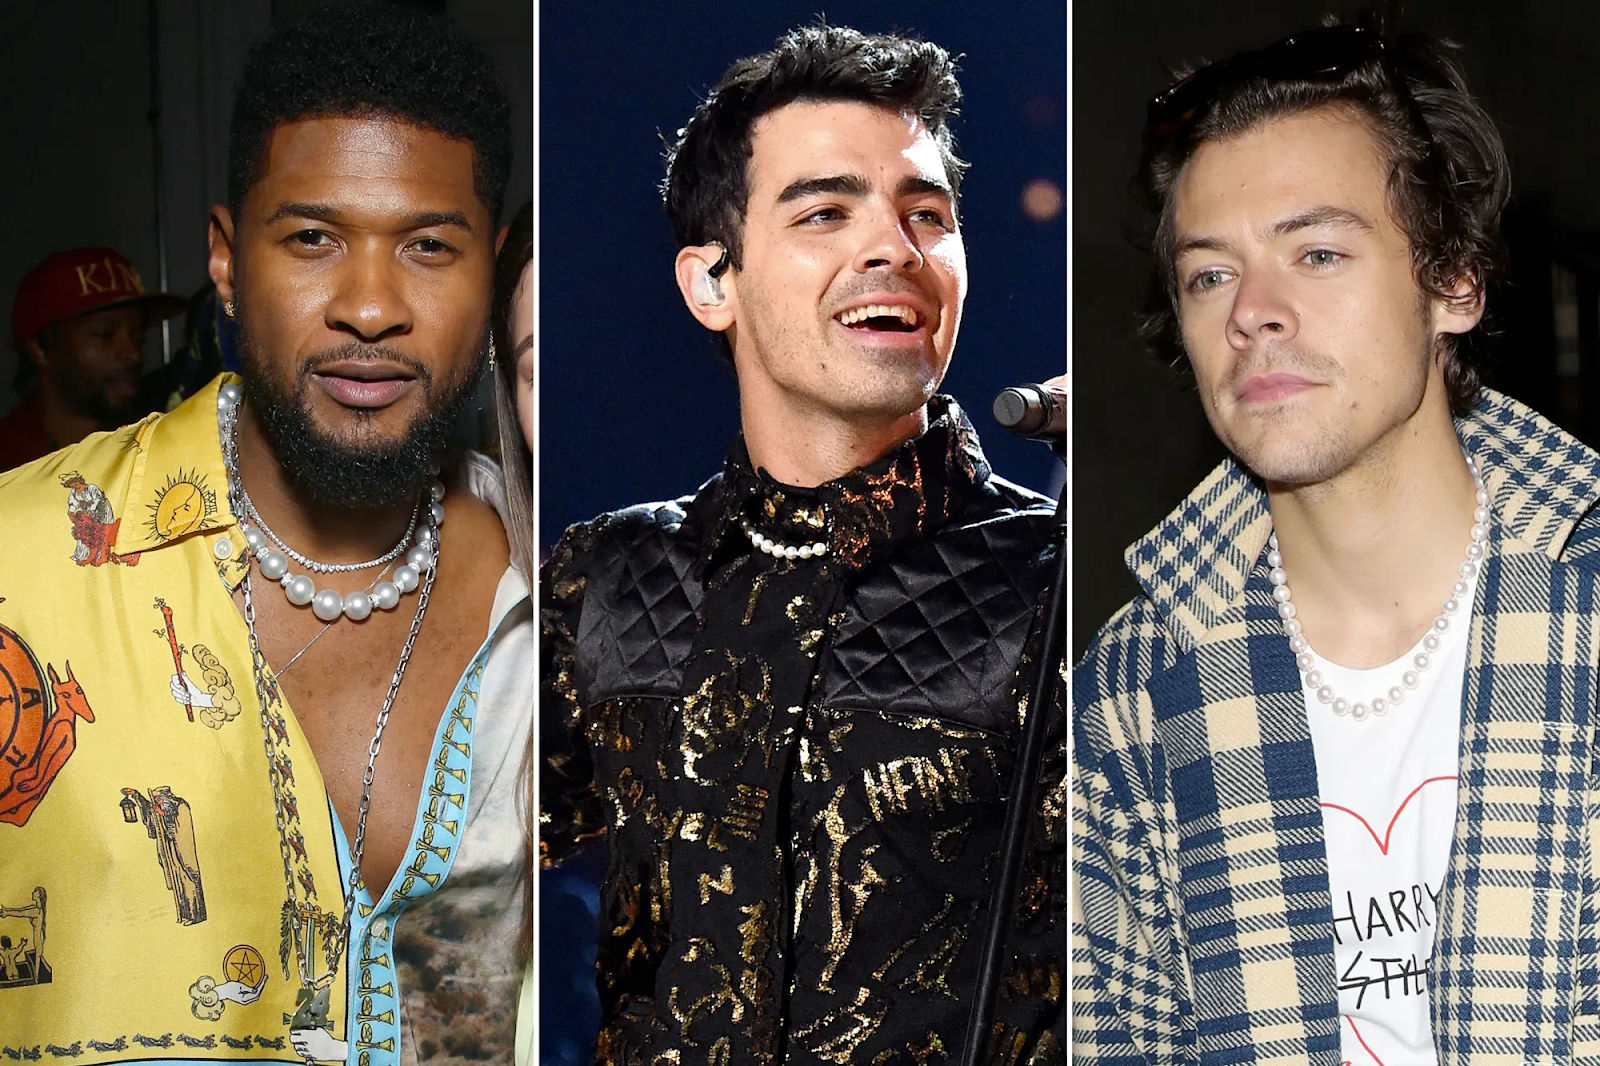 Photos of Usher, Joe Jonas, and Harry Styles wearing pearl necklaces